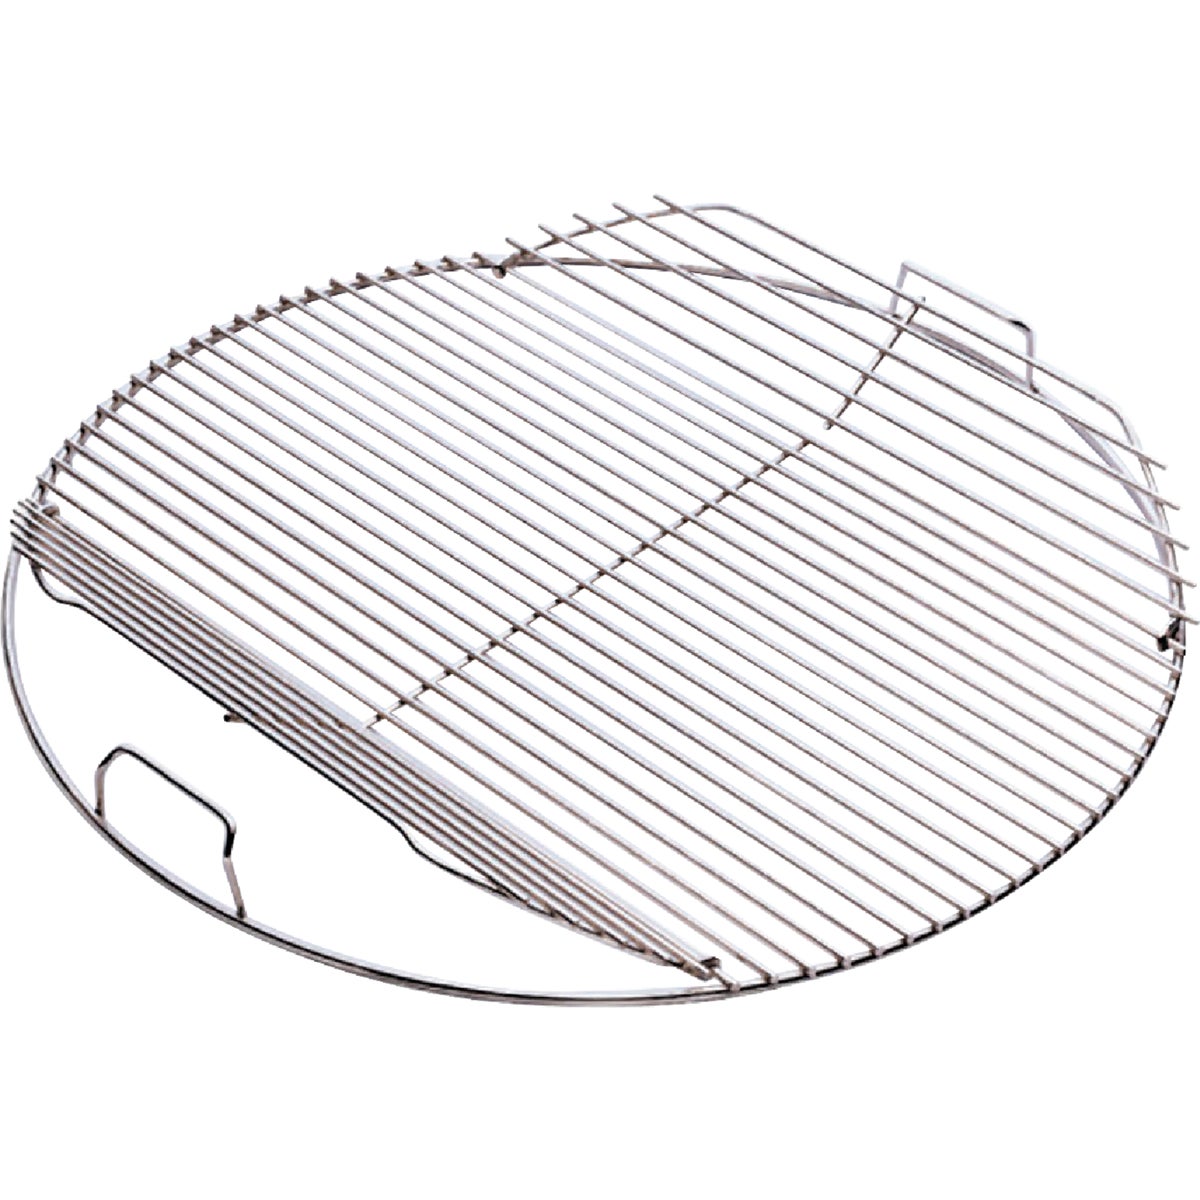 Item 819314, Replacement hinged cooking grate for 18.5 In.